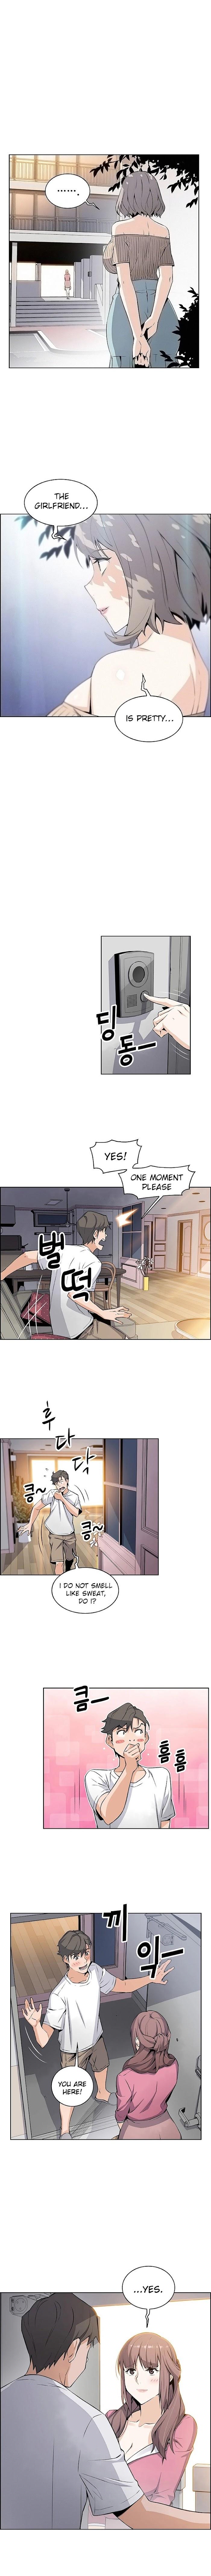 Housekeeper [Neck Pillow, Paper] Ch.49/49 [English] [Manhwa PDF] Completed 204